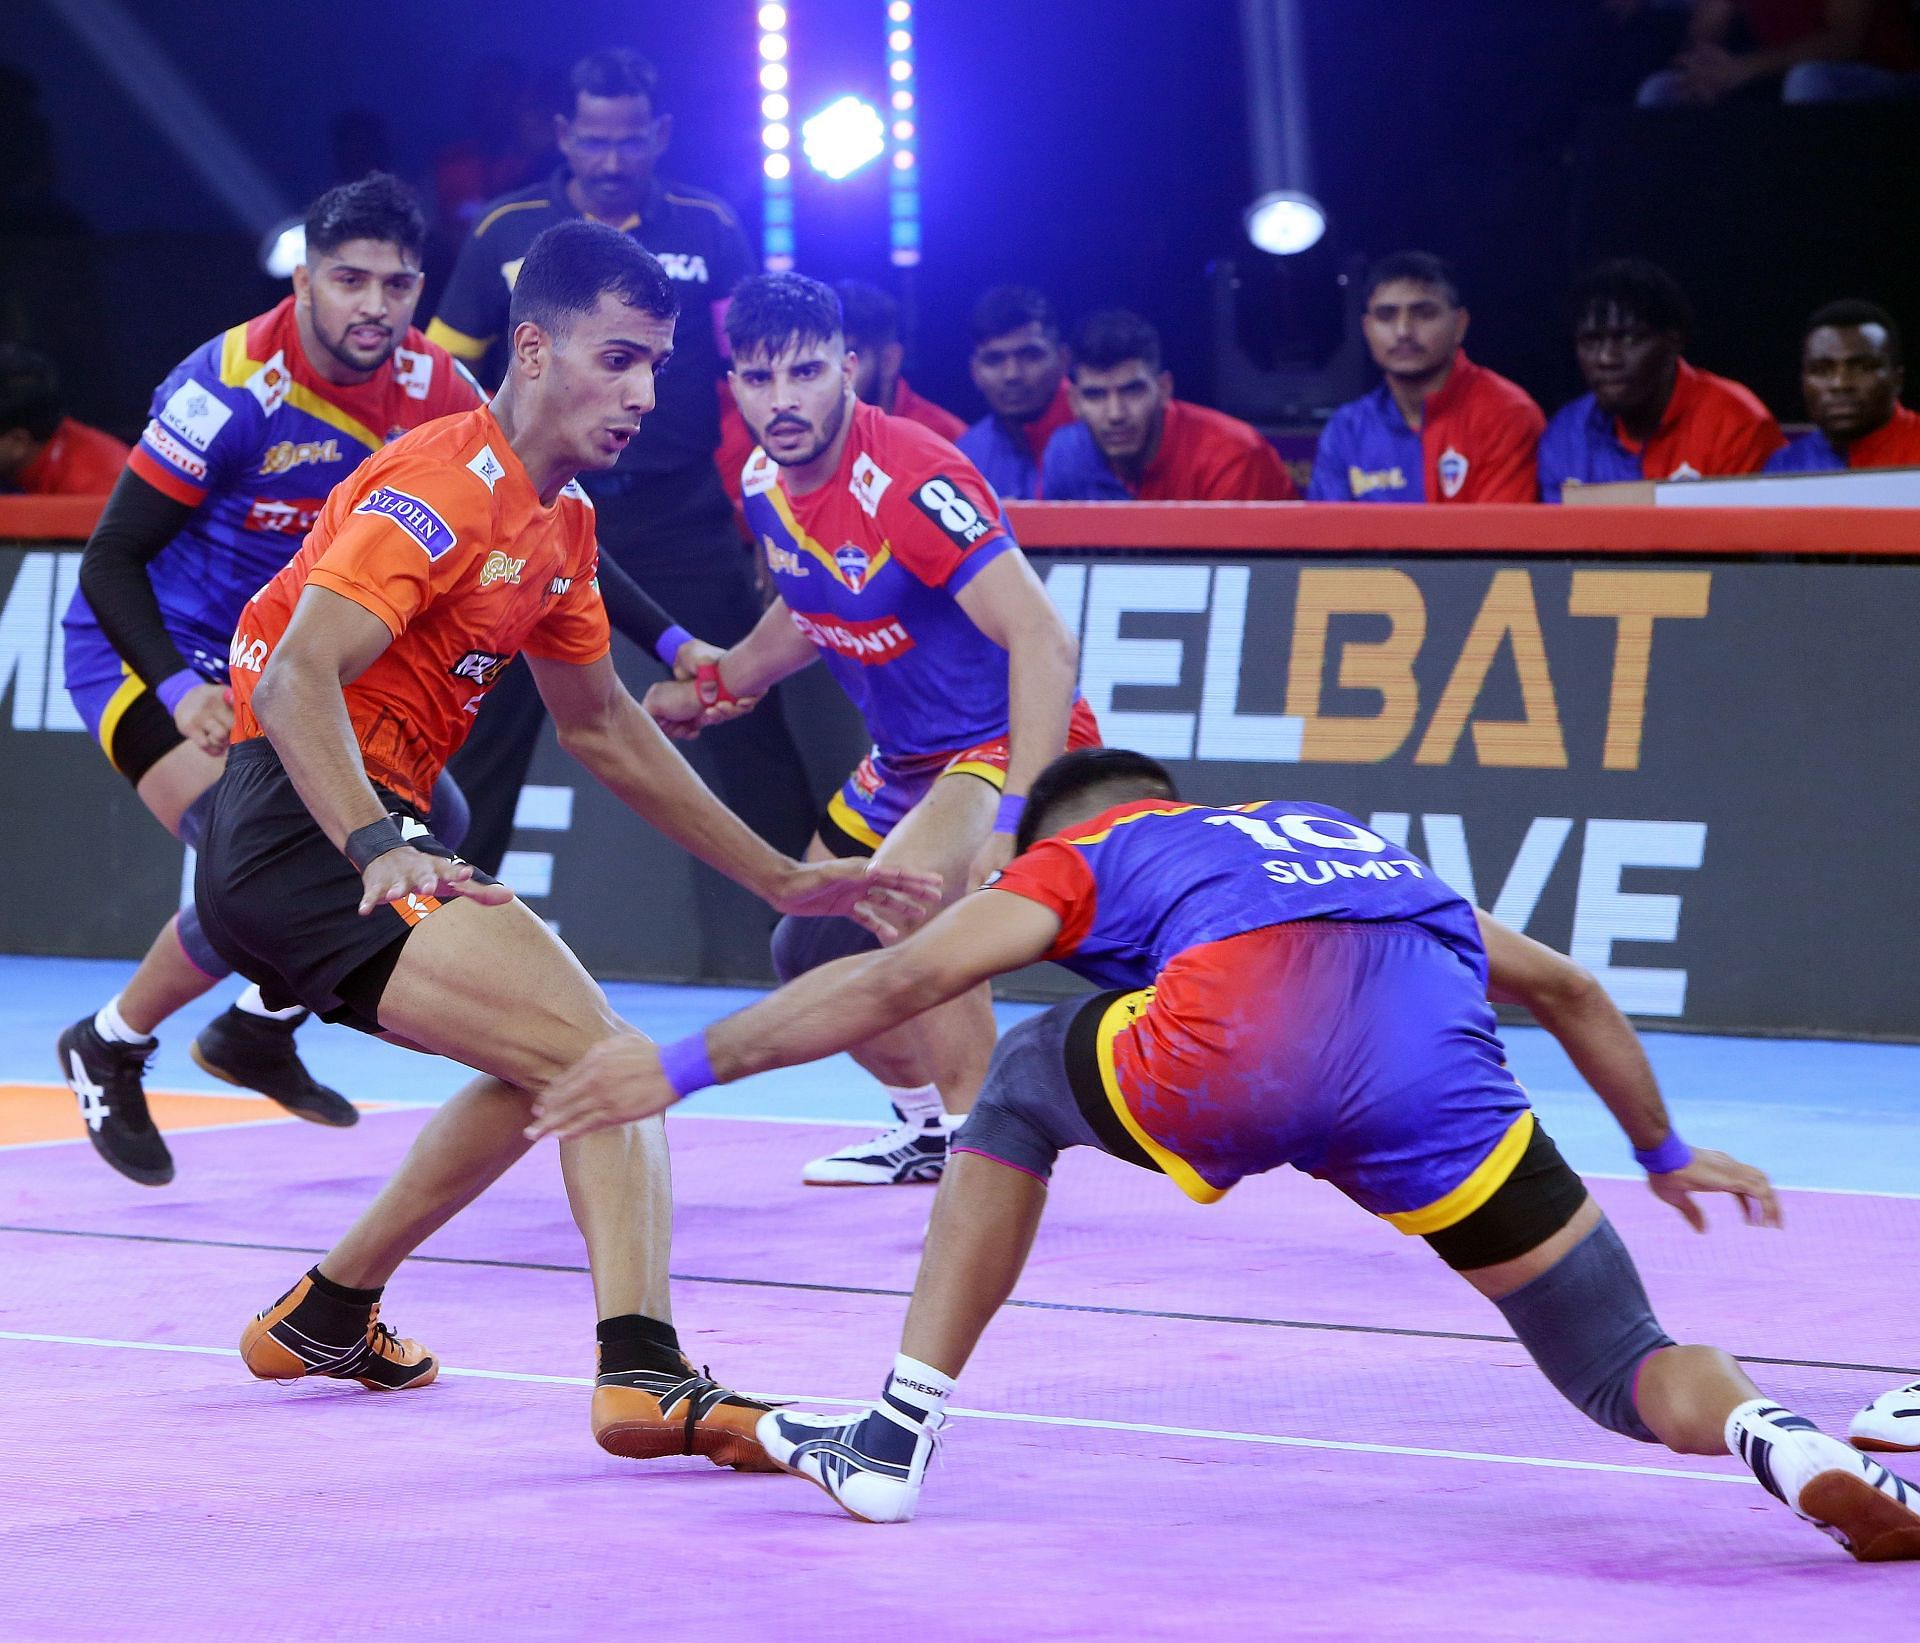 Can UP Yoddhas carry on their winning run against the Bengaluru Bulls? (Credit: PKL)